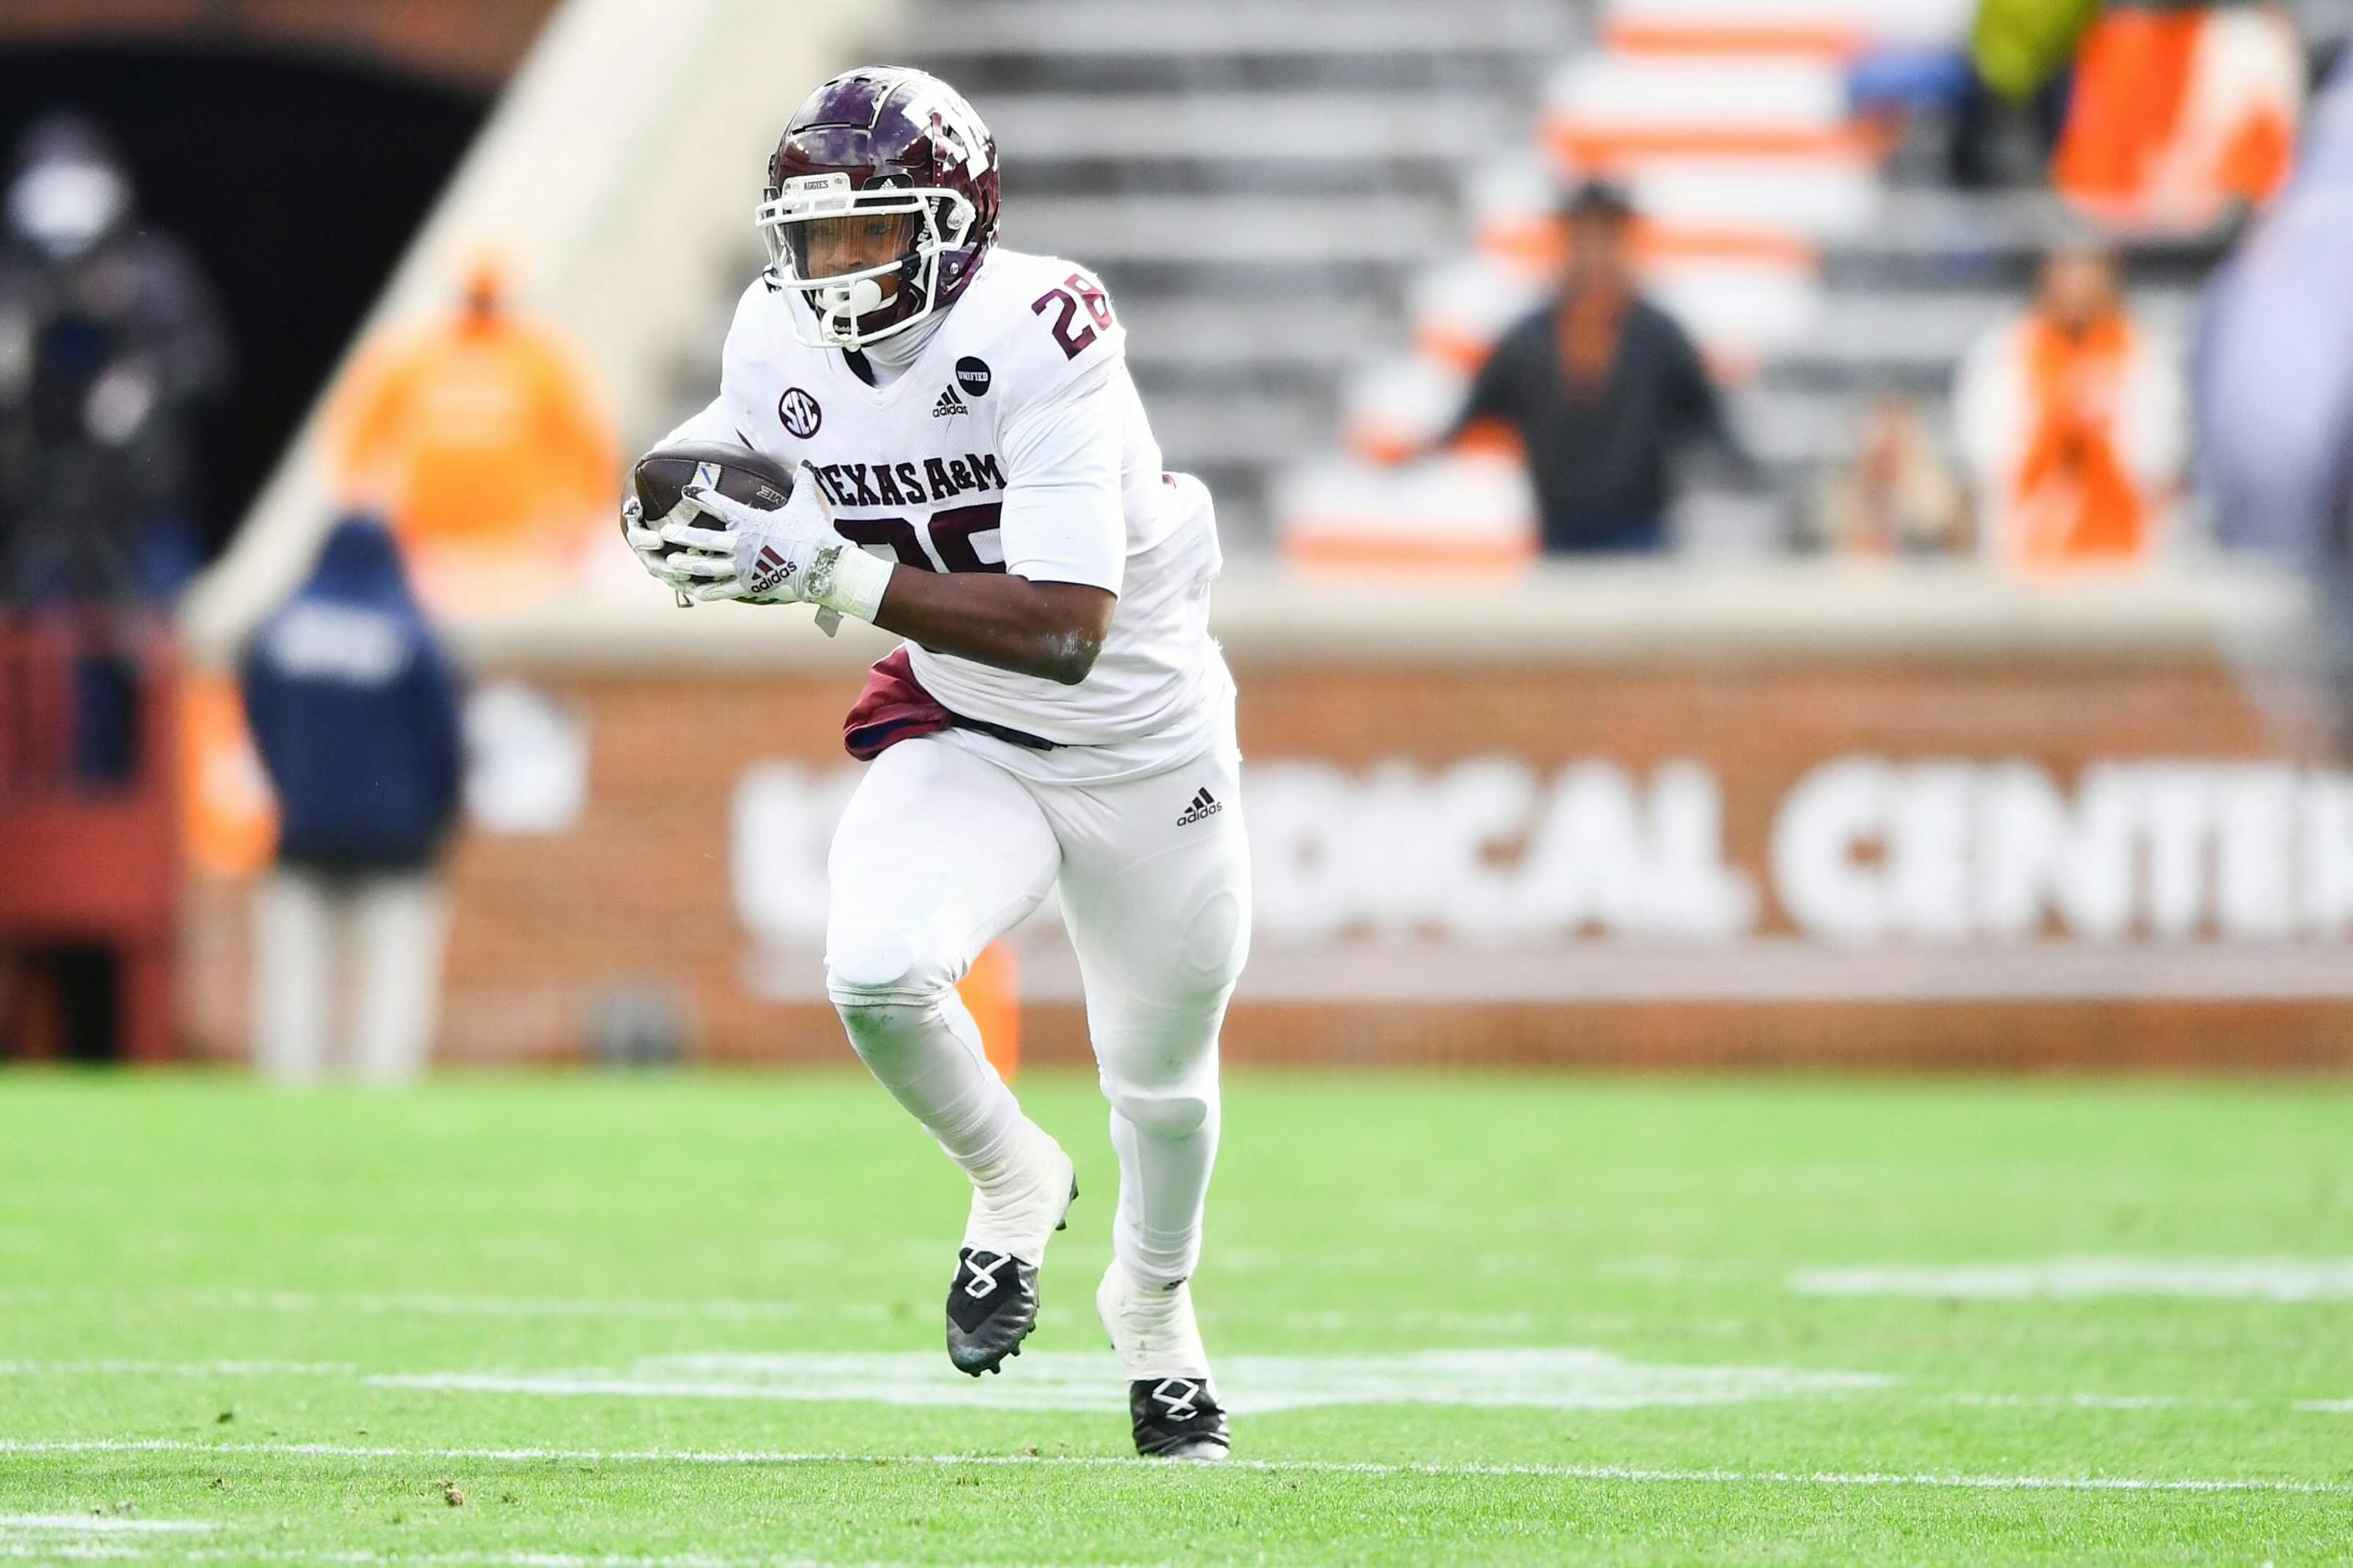 2022 NFL Draft: Aggies RB Isaiah Spiller a menace at contact - Page 2